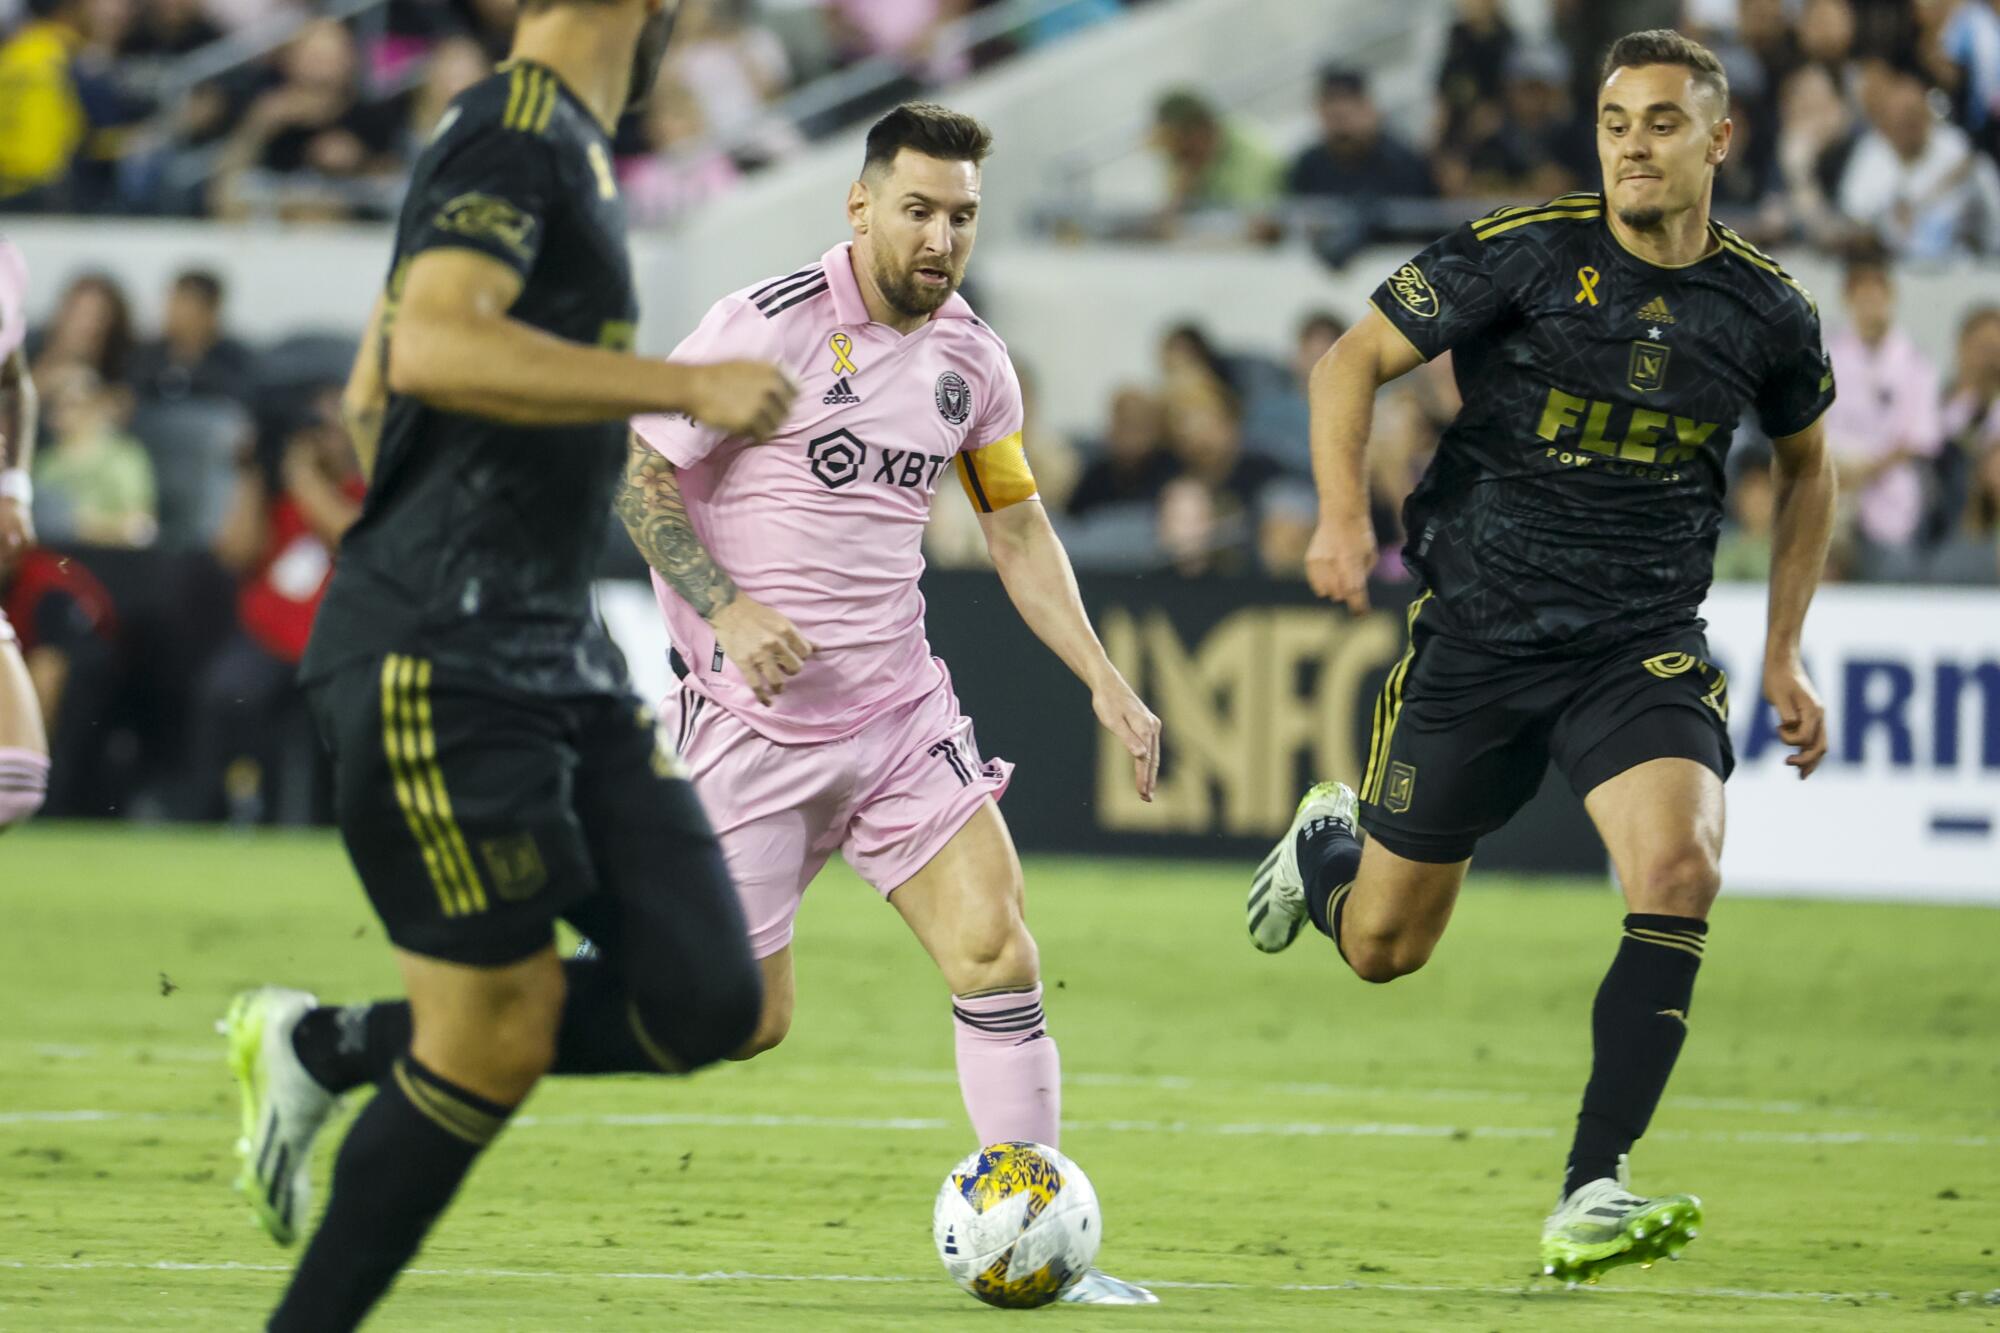 Inter Miami's Lionel Messi, center, controls the ball during an MLS soccer match between the Inter Miami CF and LAFC